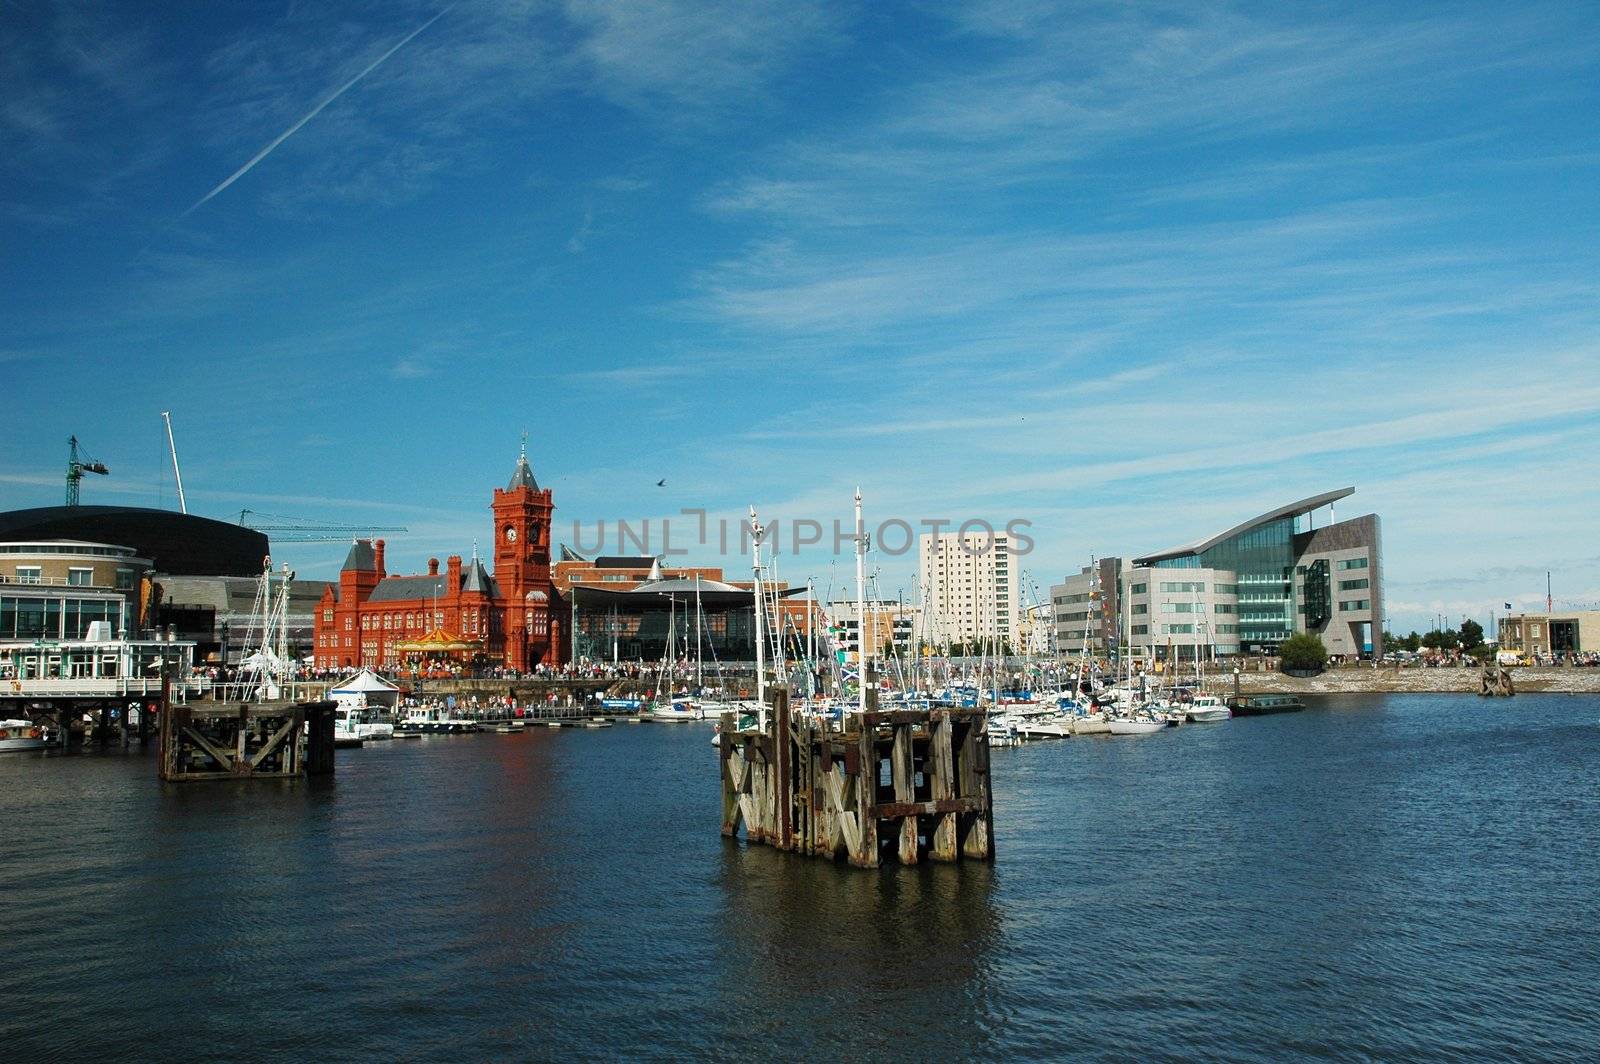 cardiff bay with red historical building in very summer nice day with blue sky covered by clouds